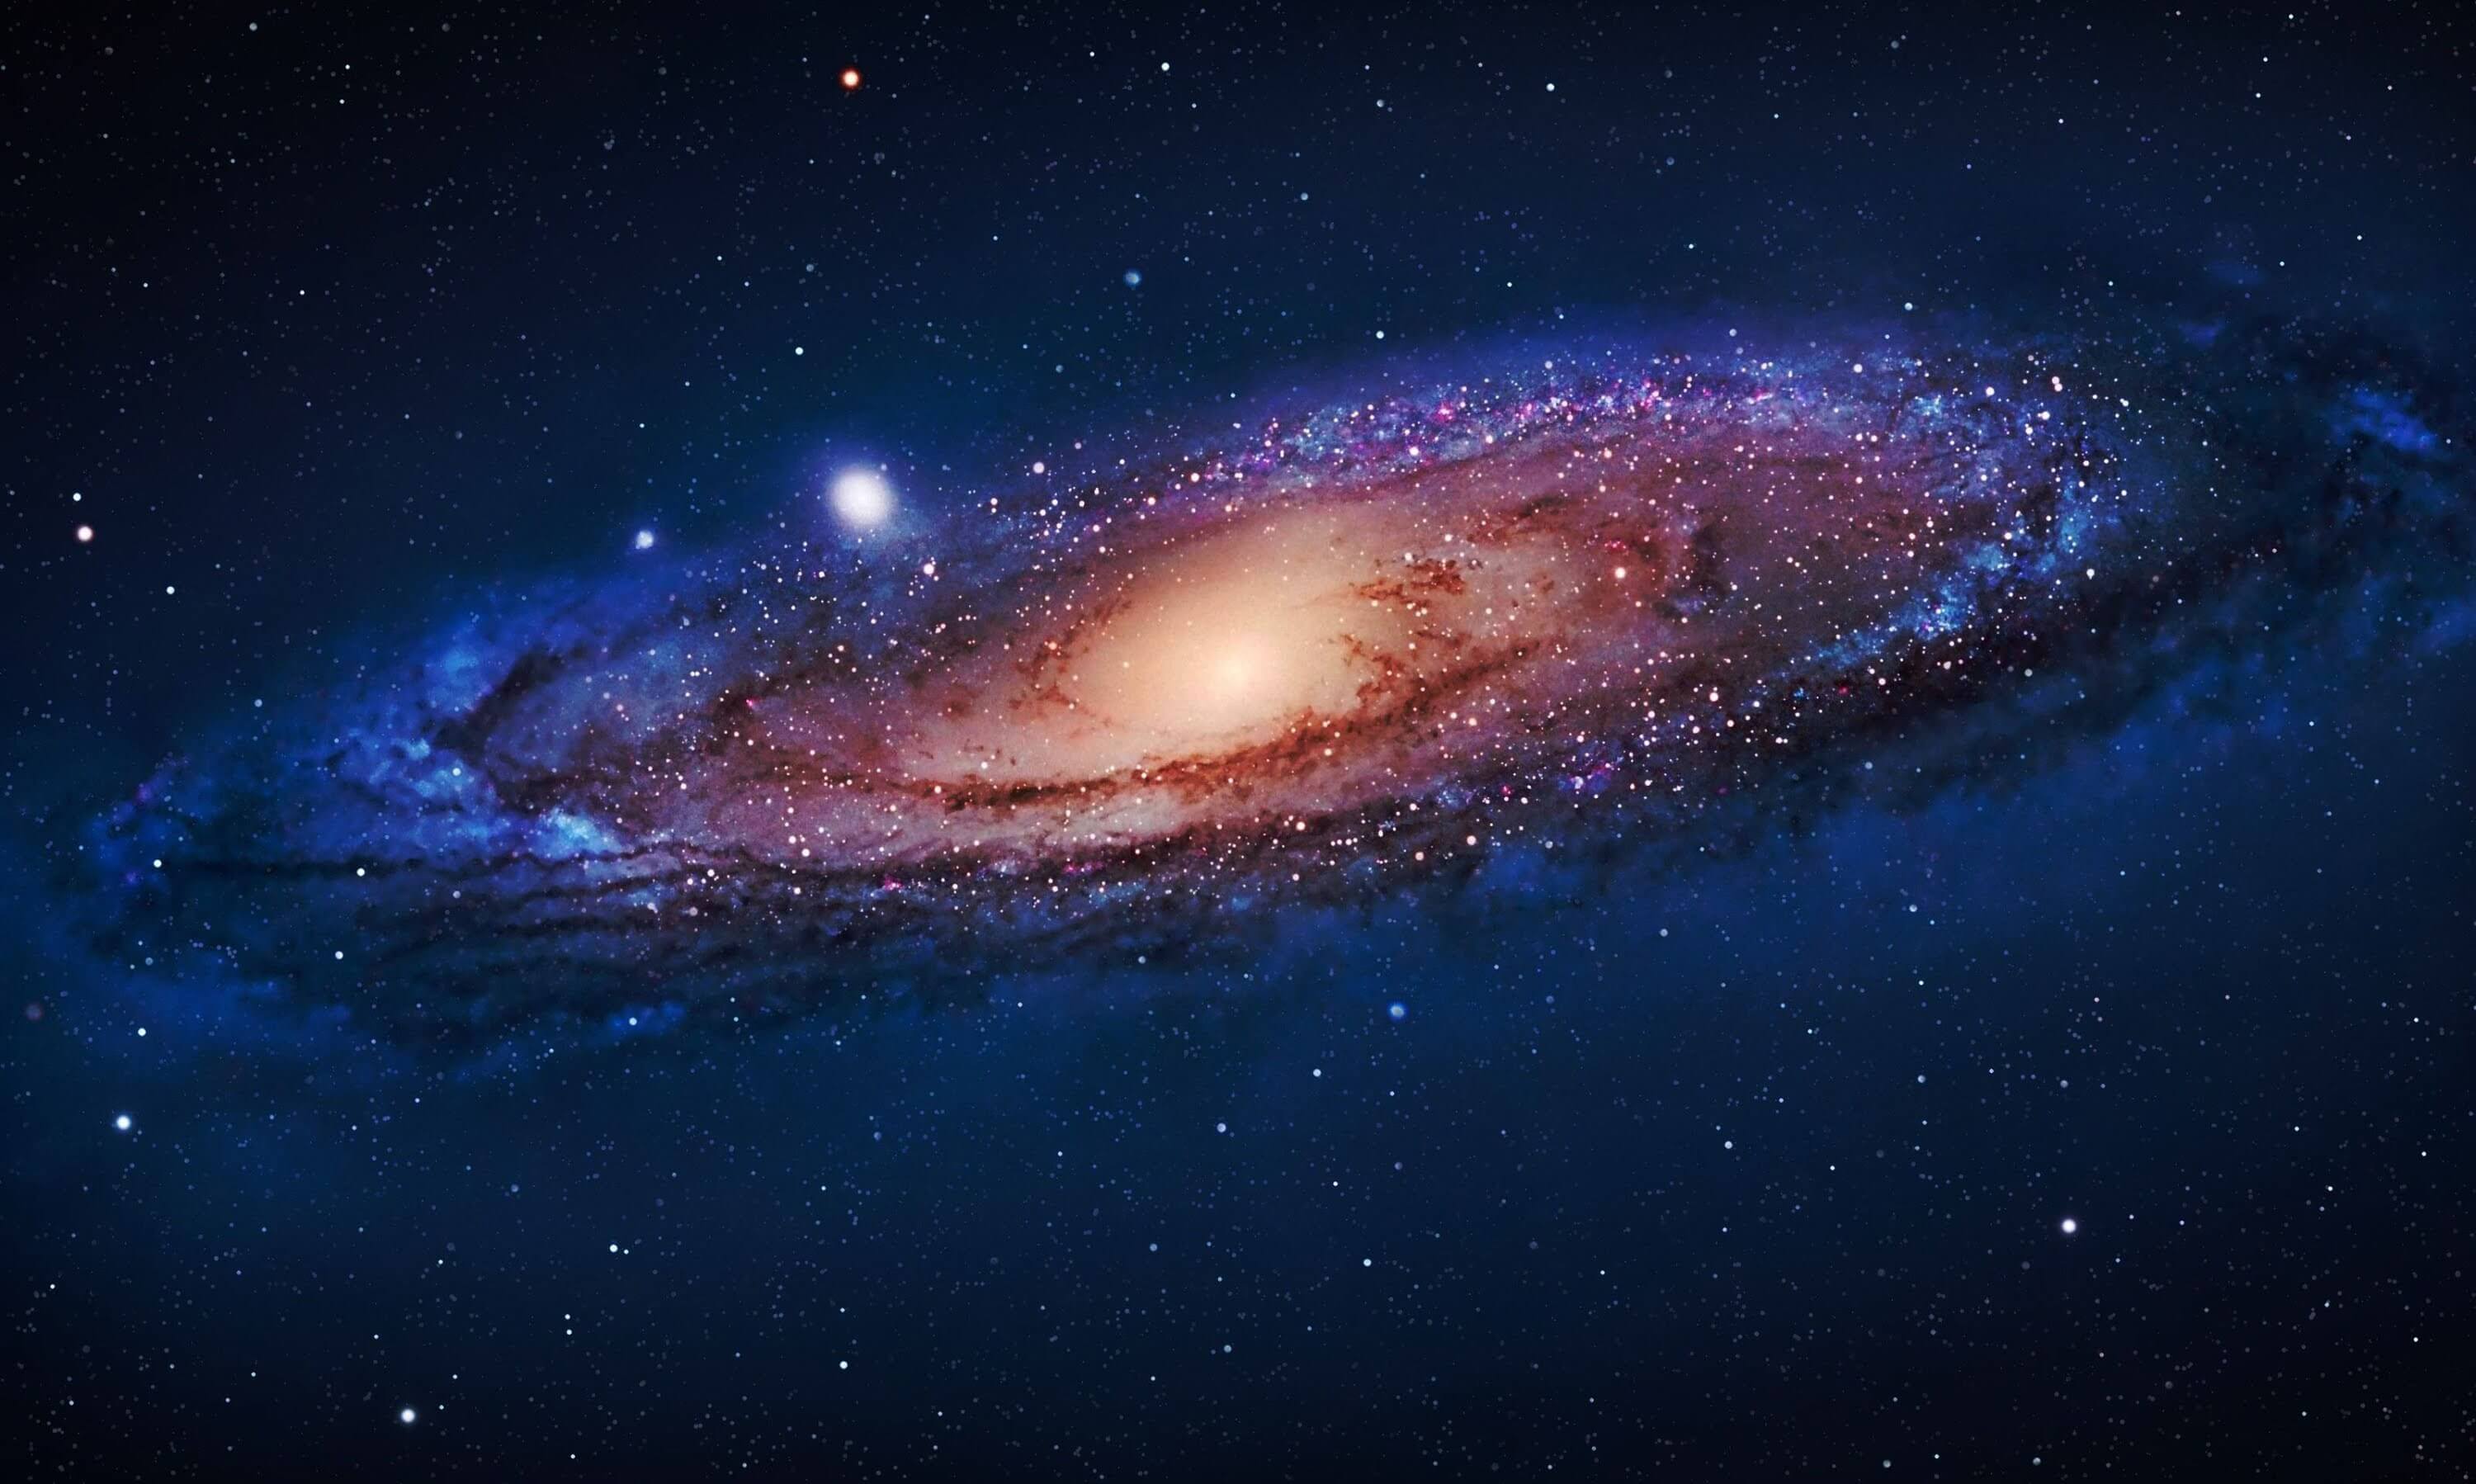 Andromeda galaxy - scientific facts and myths - Upcosmos.com